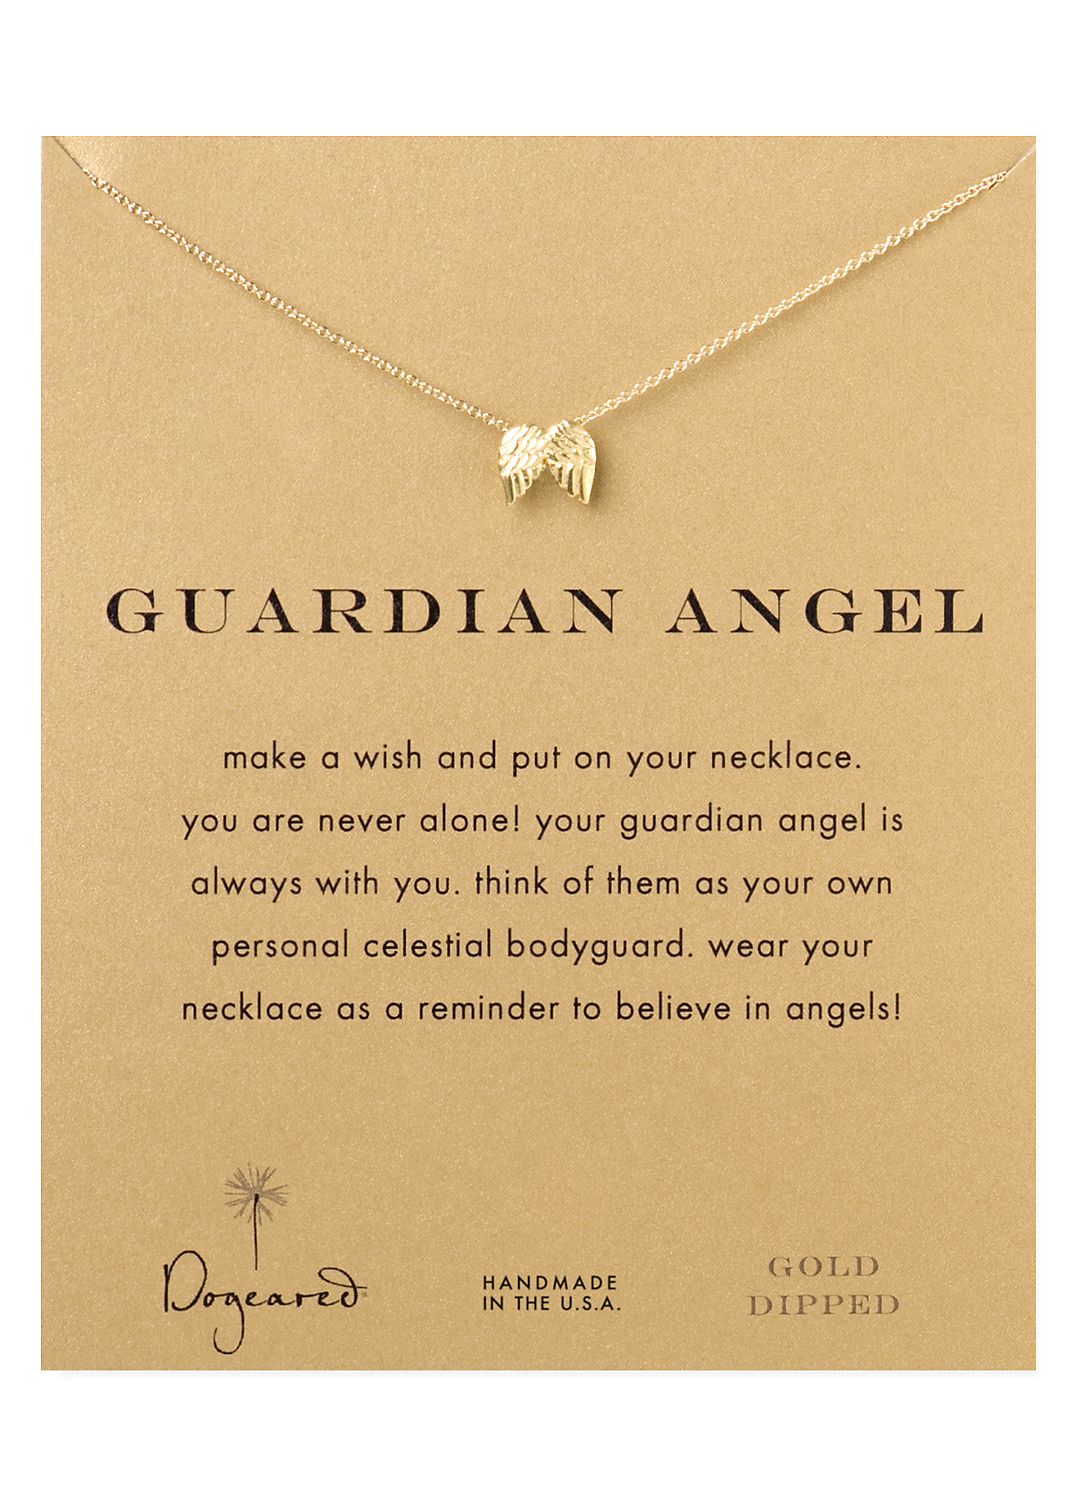 Guardian Angel Necklace Image 2